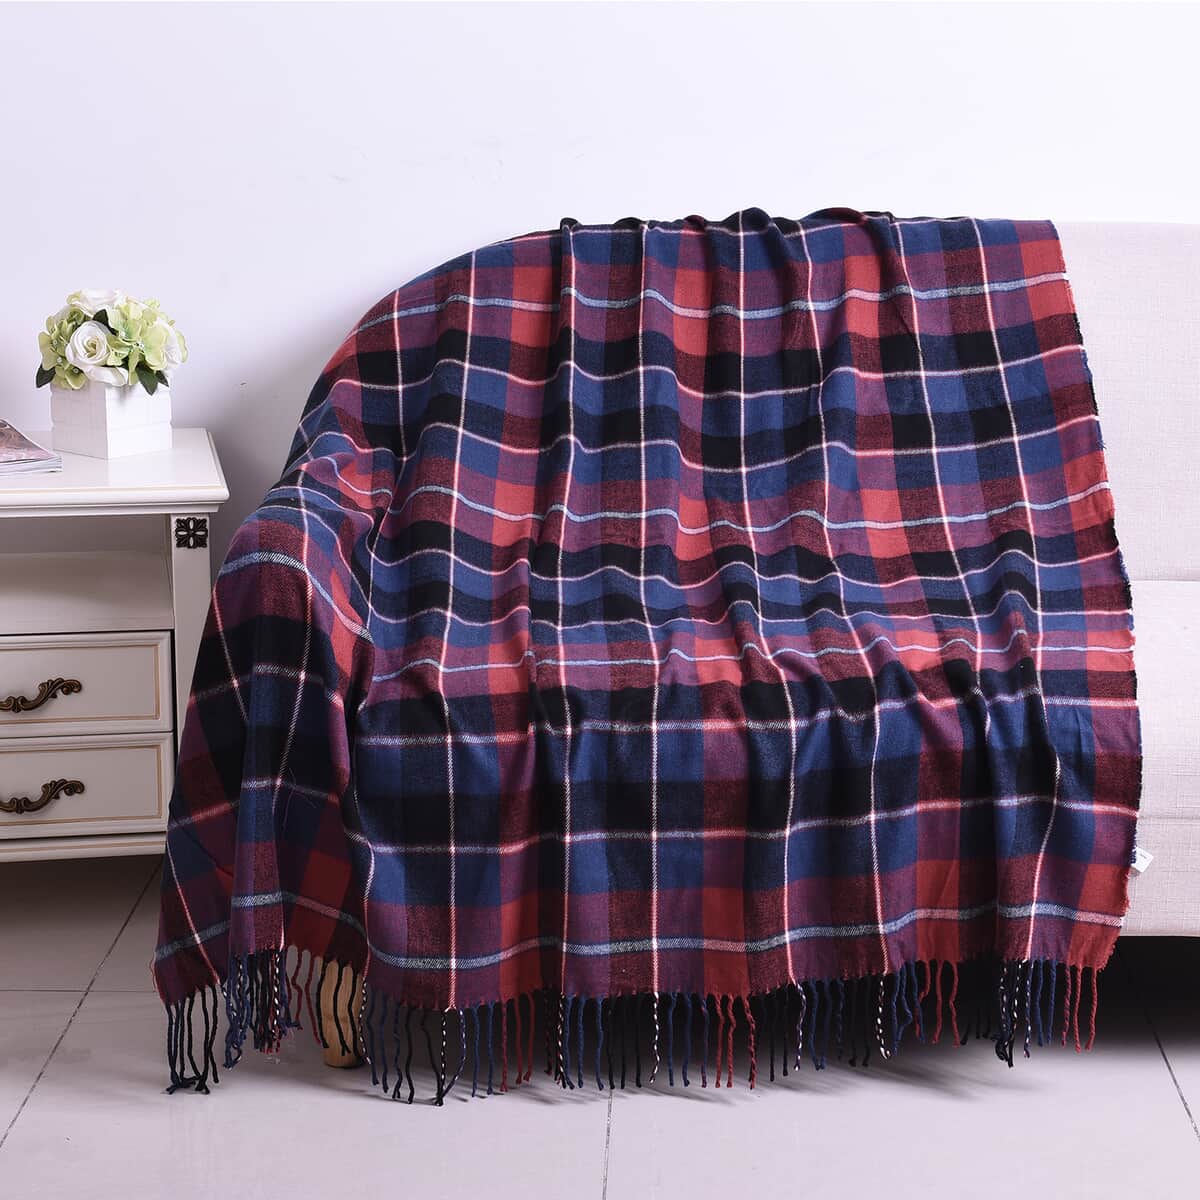 Homesmart Acrylic Multi Color Checker Pattern Throw Blanket with Tassels for Couch for Women, Men and Kids image number 4